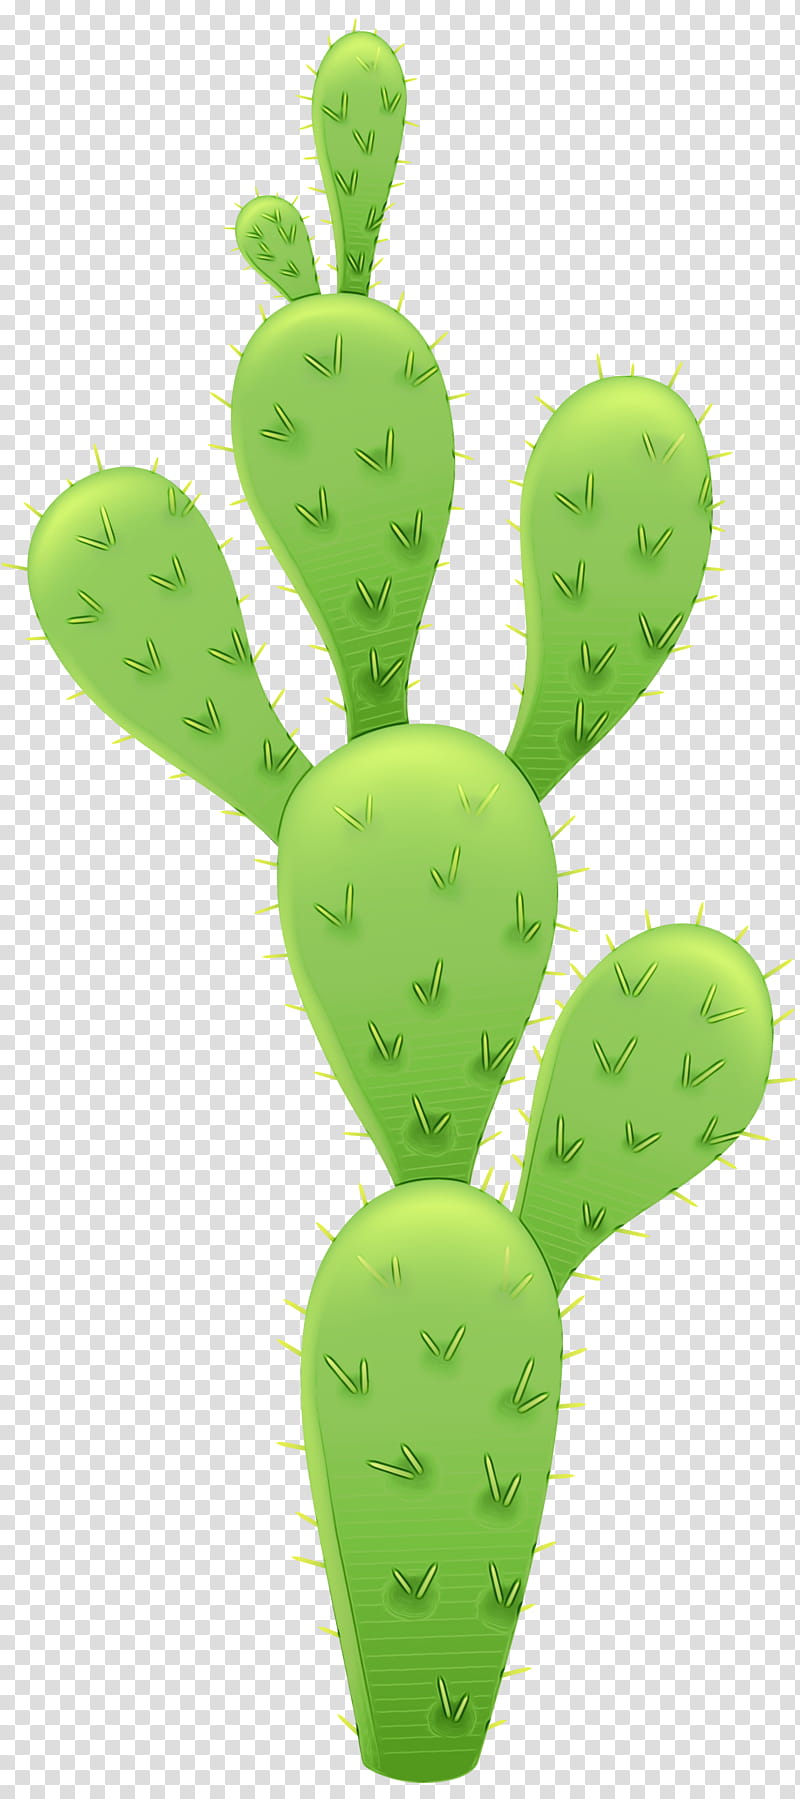 Bunny Ears, Cactus, Plants, Bunny Ears Cactus, Barbary Fig, Cactus Flowers, Succulent Plant, Eastern Prickly Pear transparent background PNG clipart